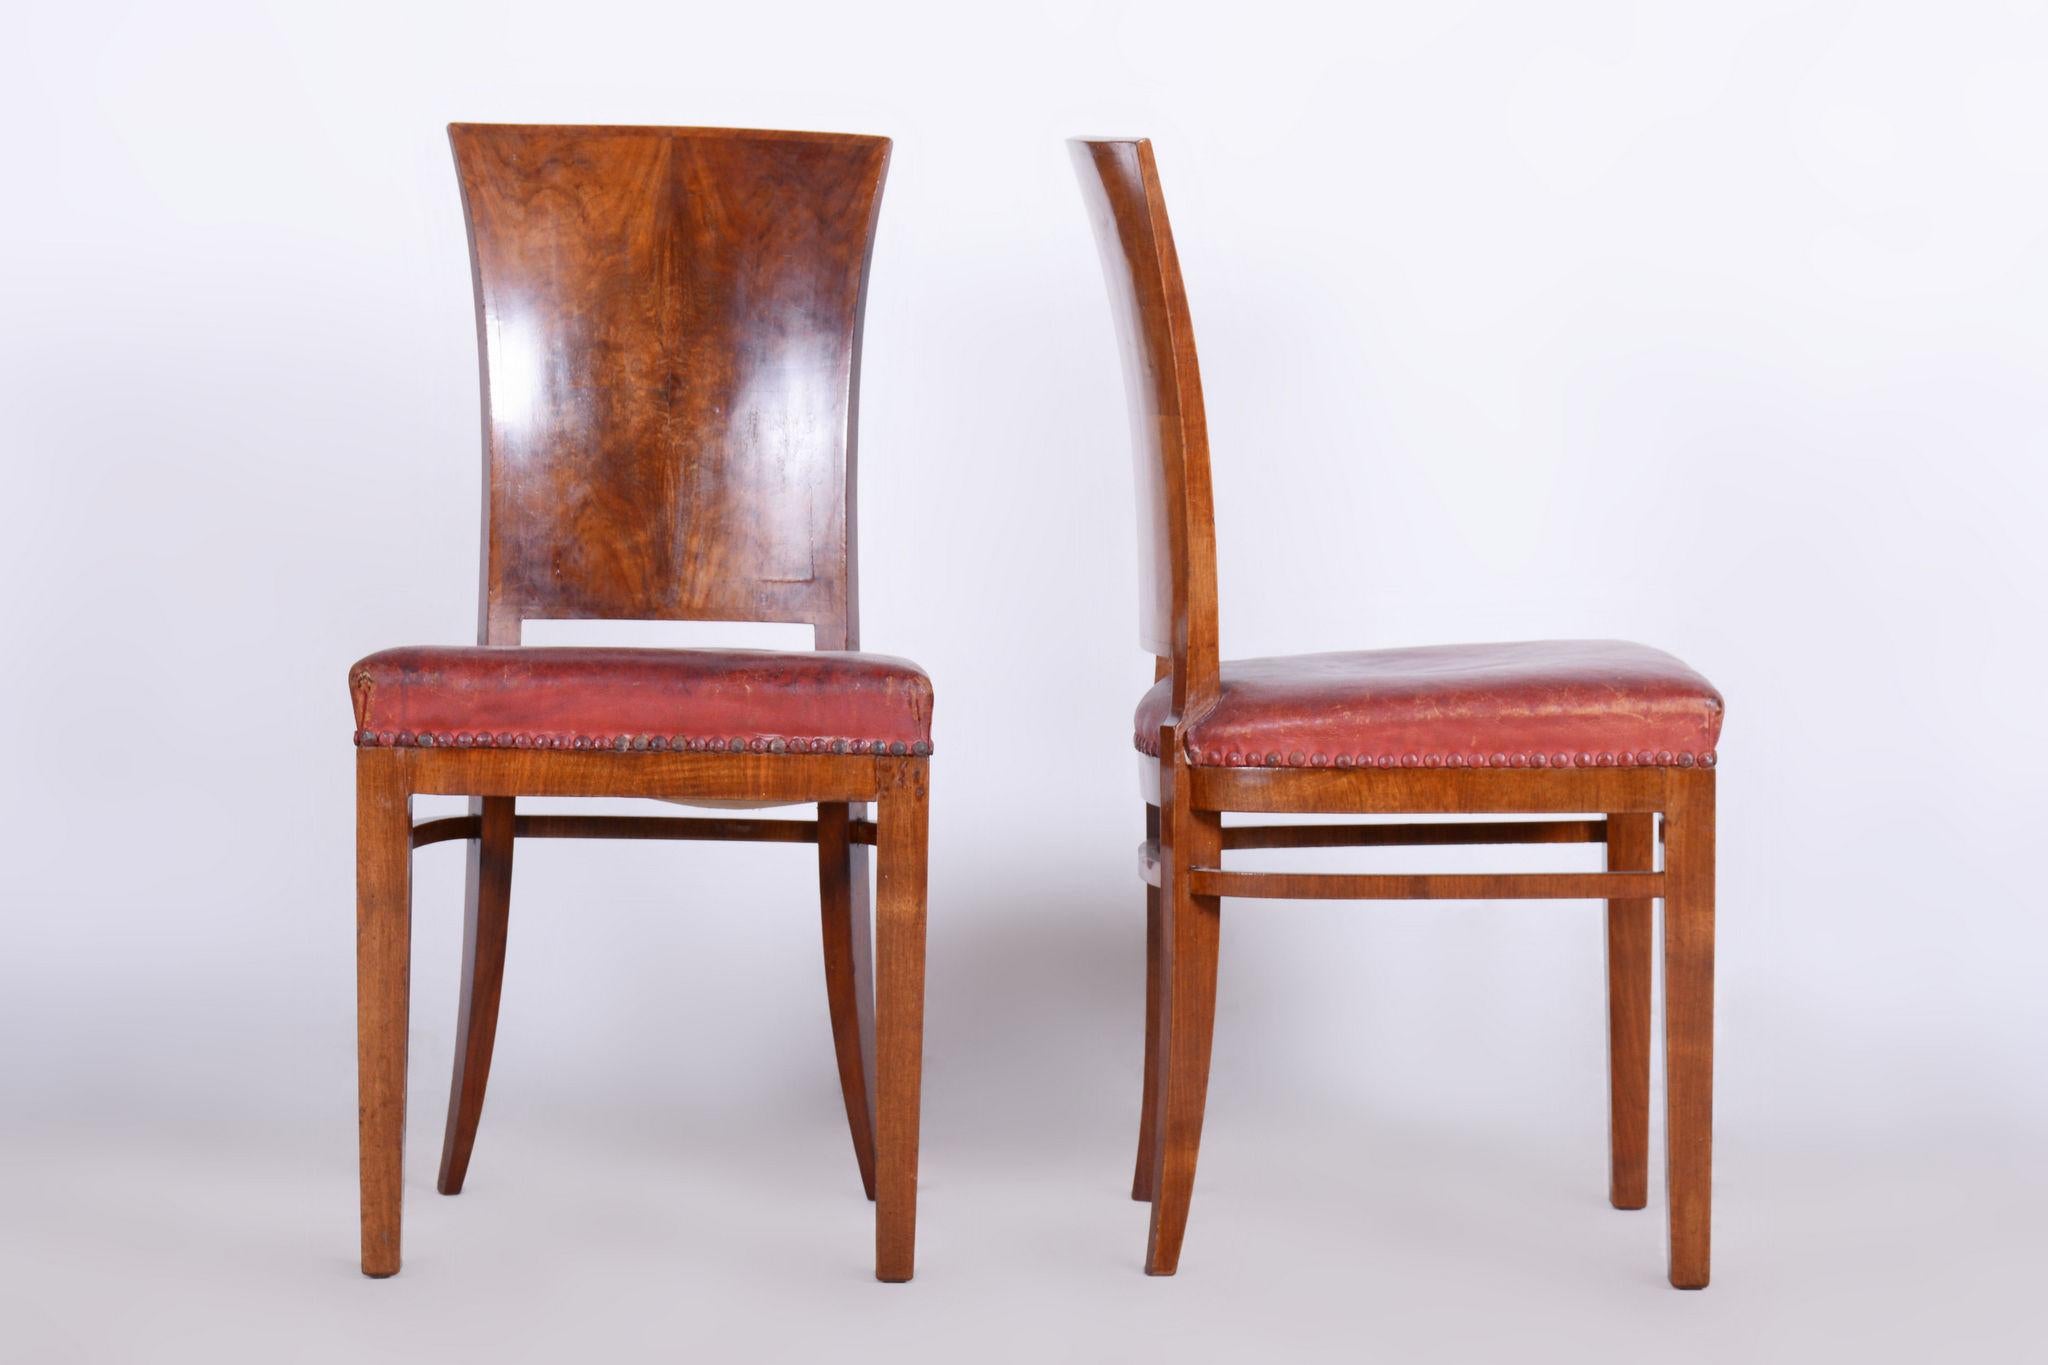 Six Art Deco Chairs, Walnut, Restored, Original Upholstery, France, 1920s For Sale 4